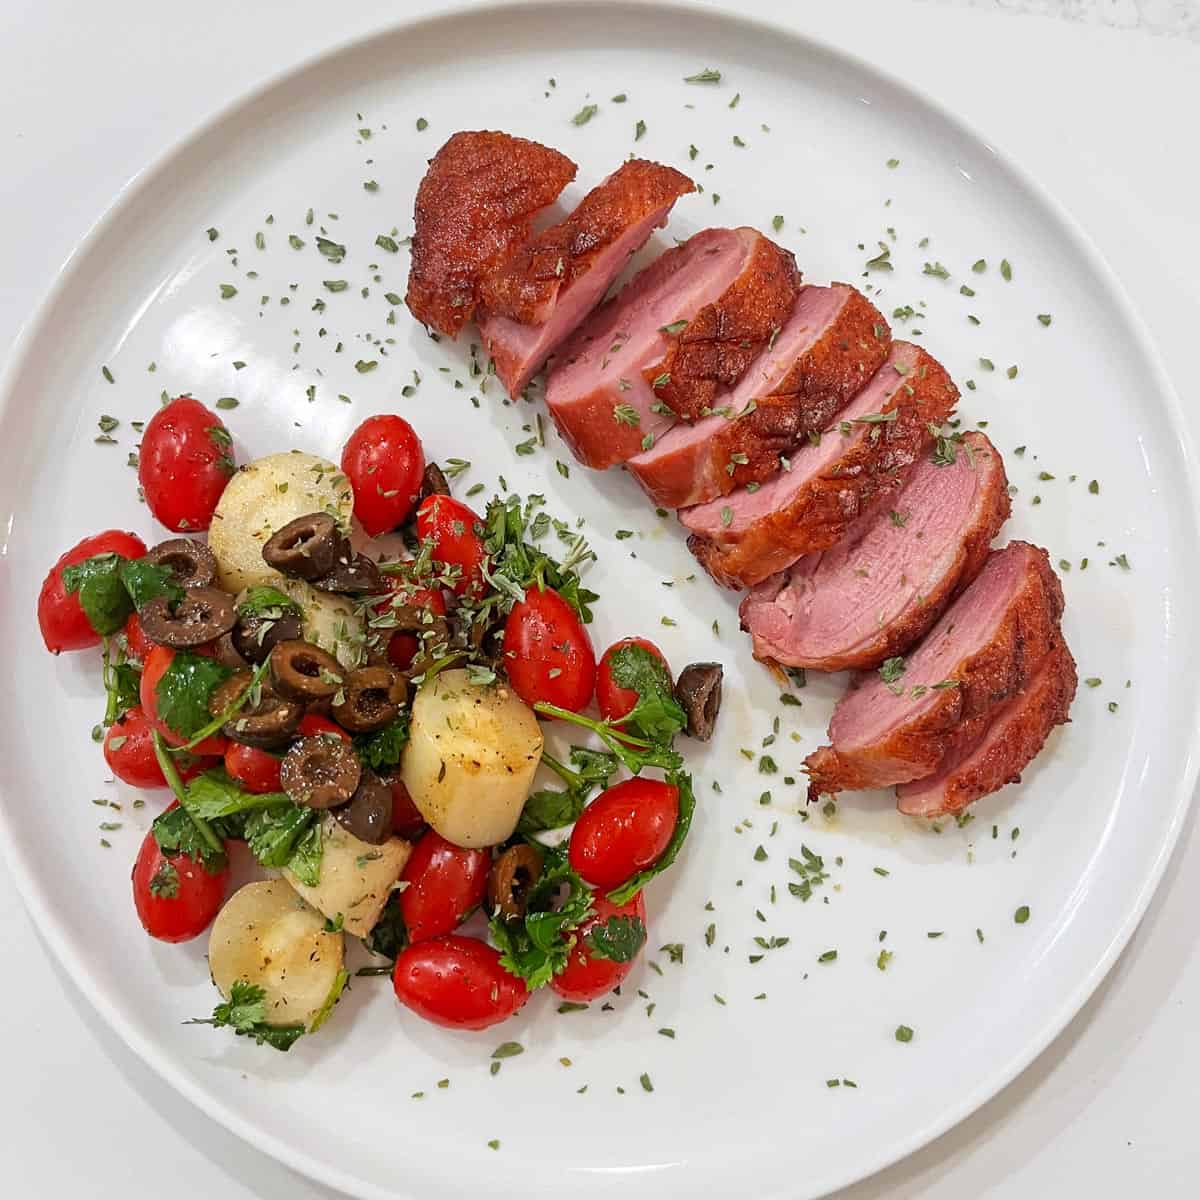 A sliced duck breast is served with a salad on a white plate.